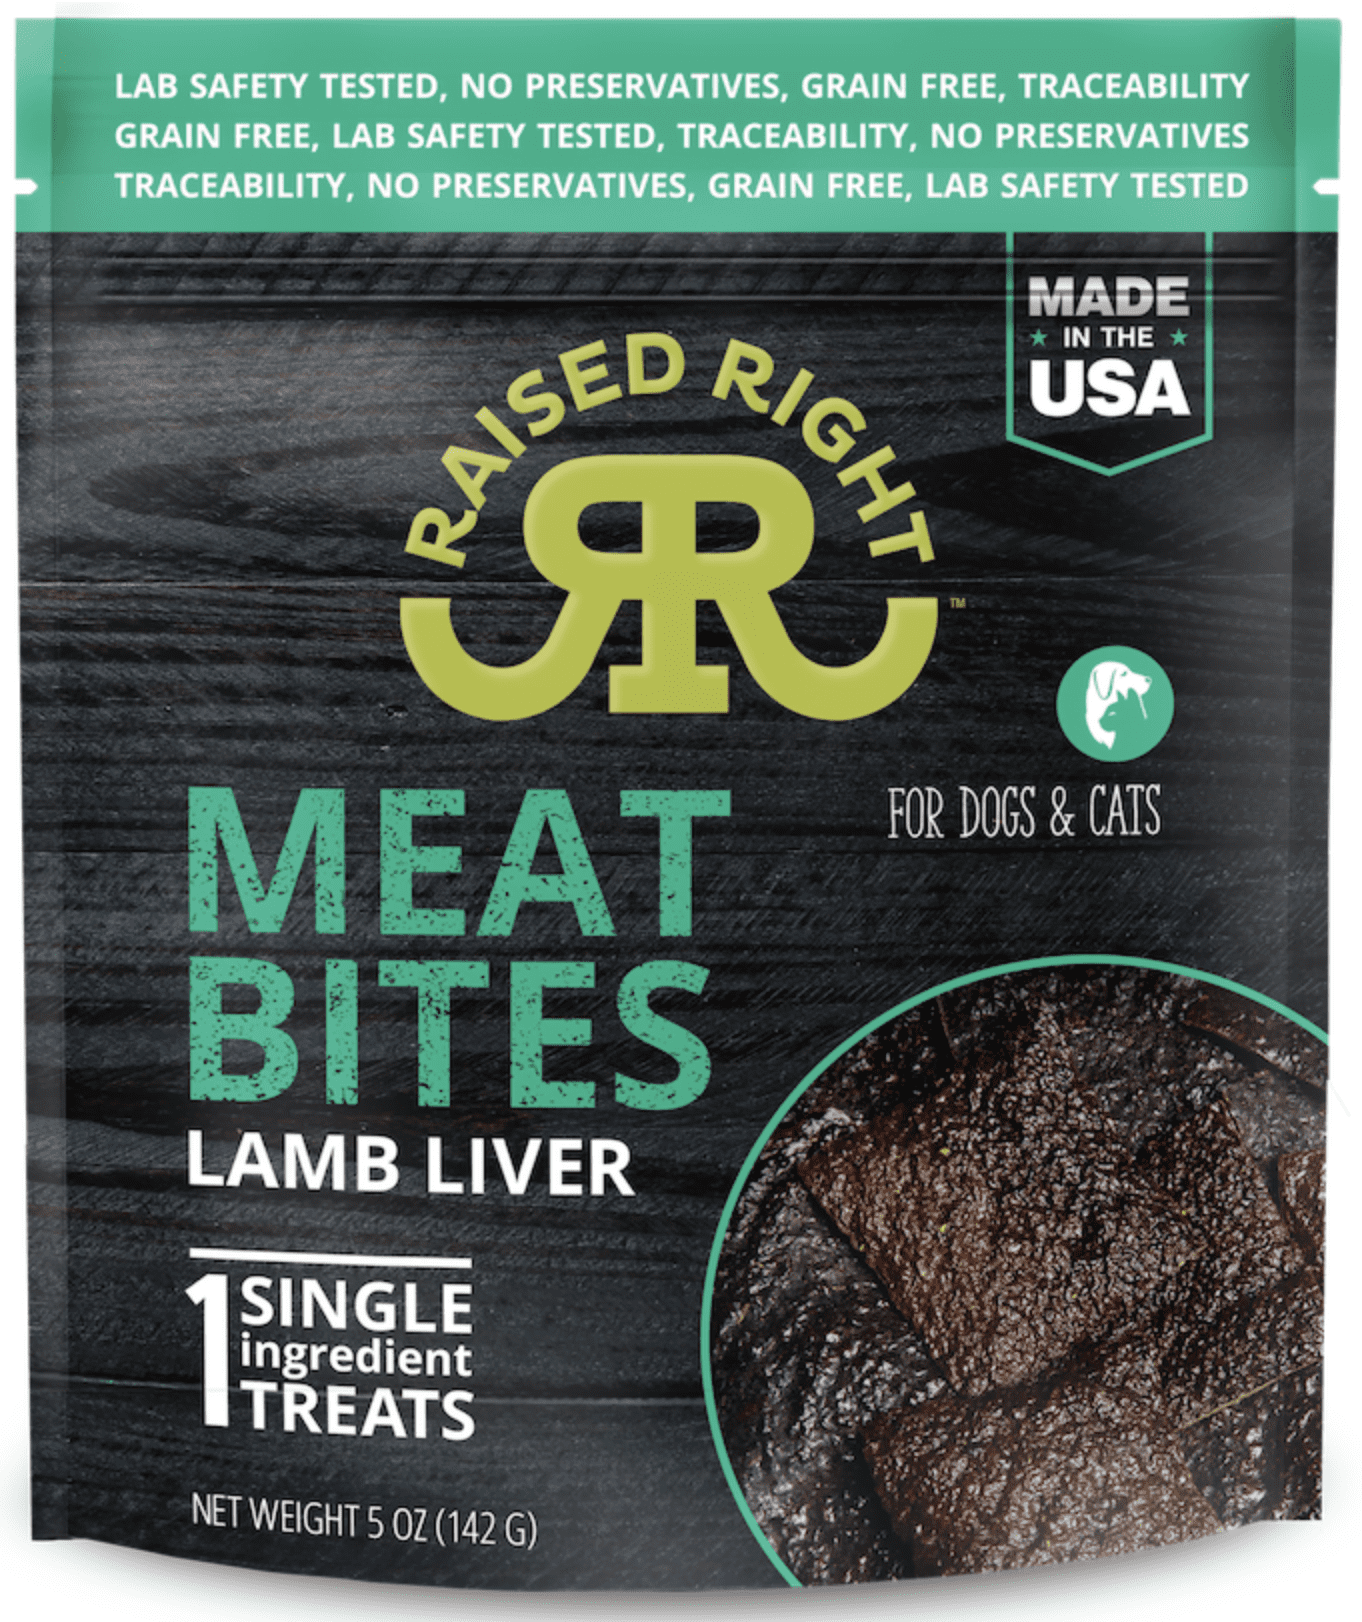 package of raised right meat bites dog treats